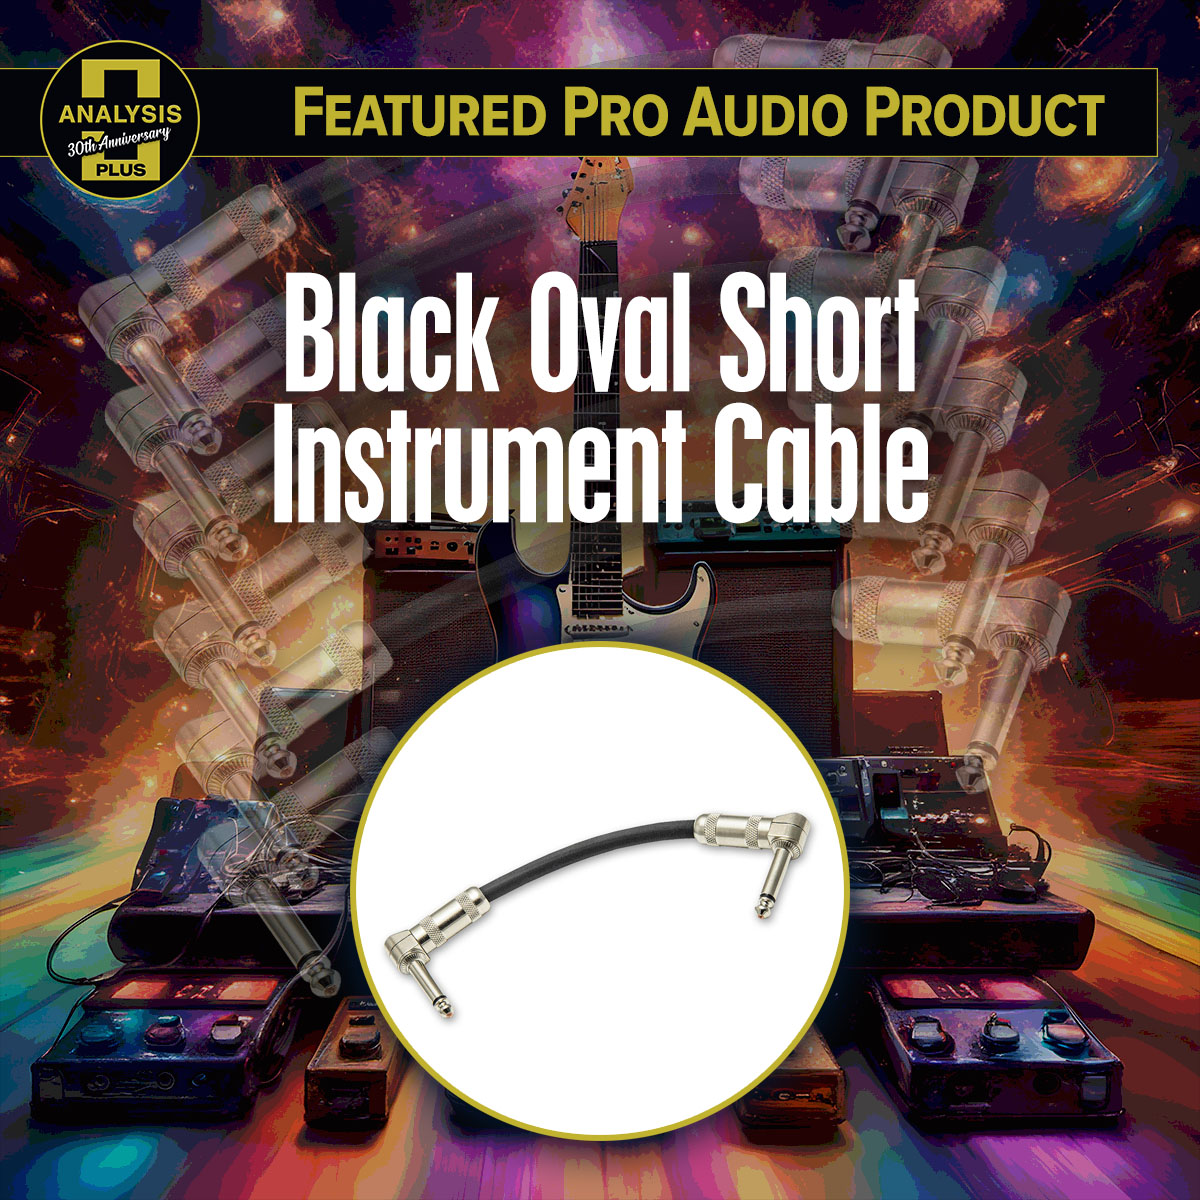 Black Oval Short Instrument Cable